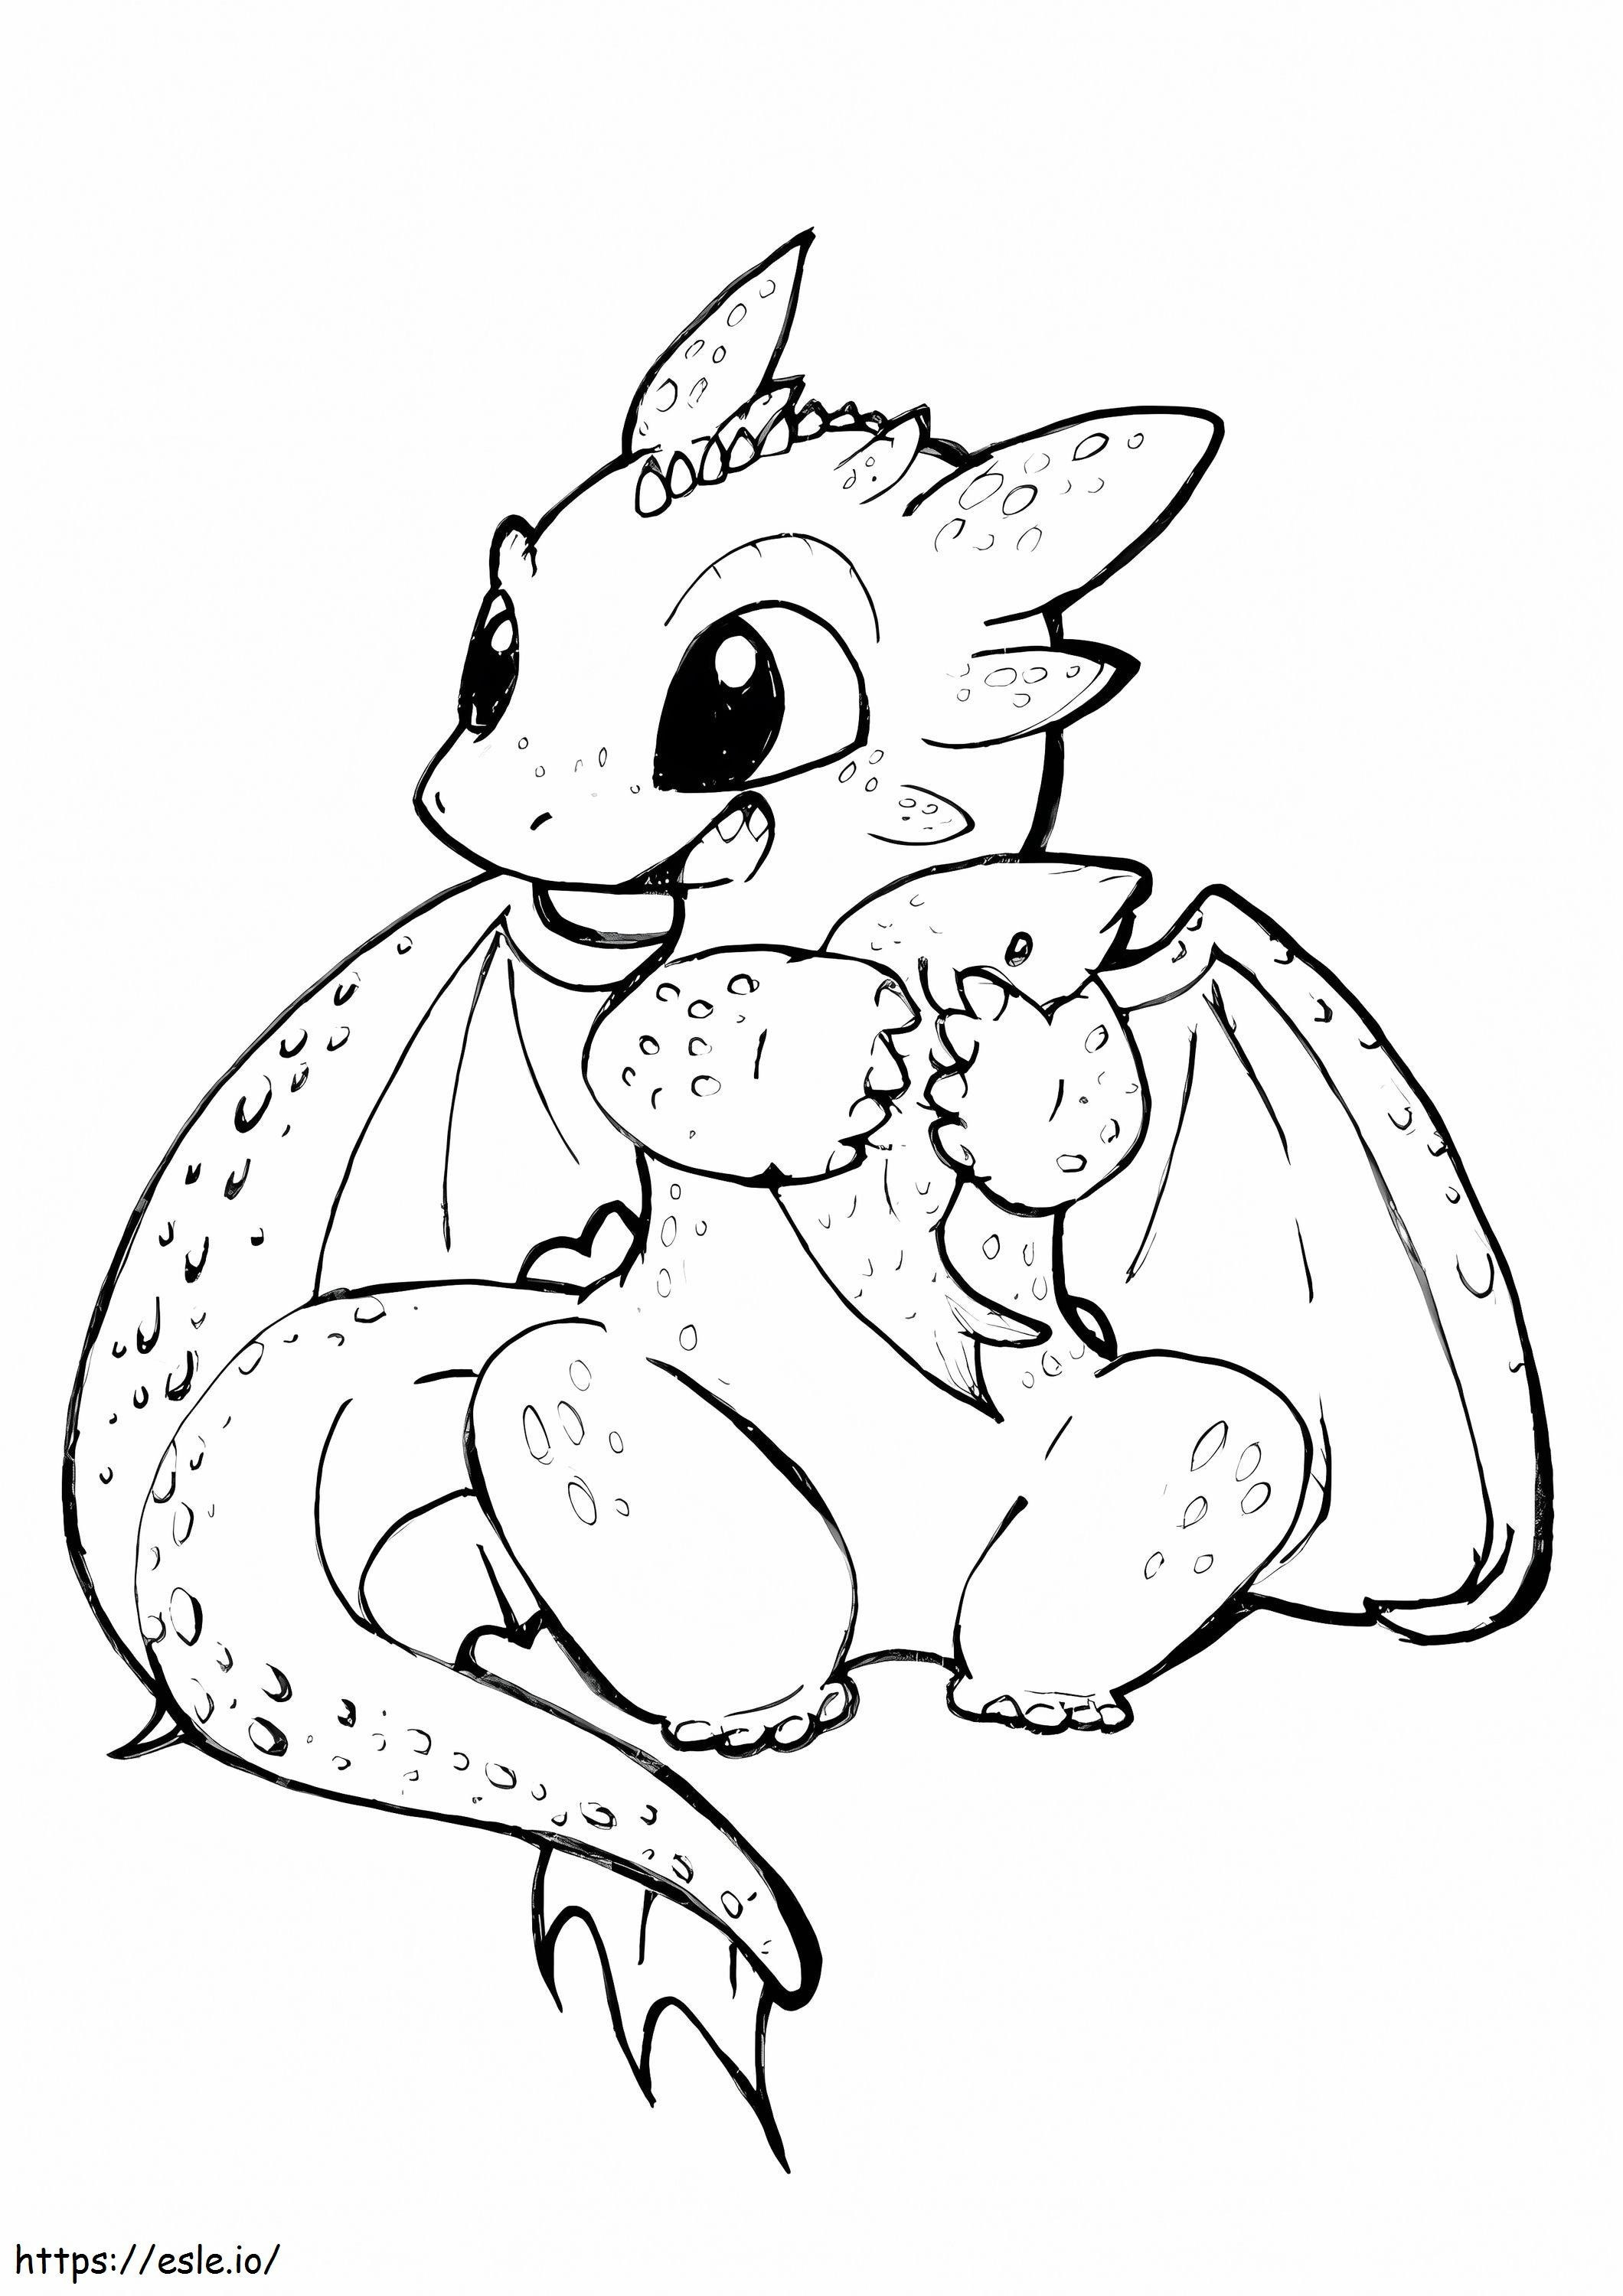 Baby Toothless coloring page